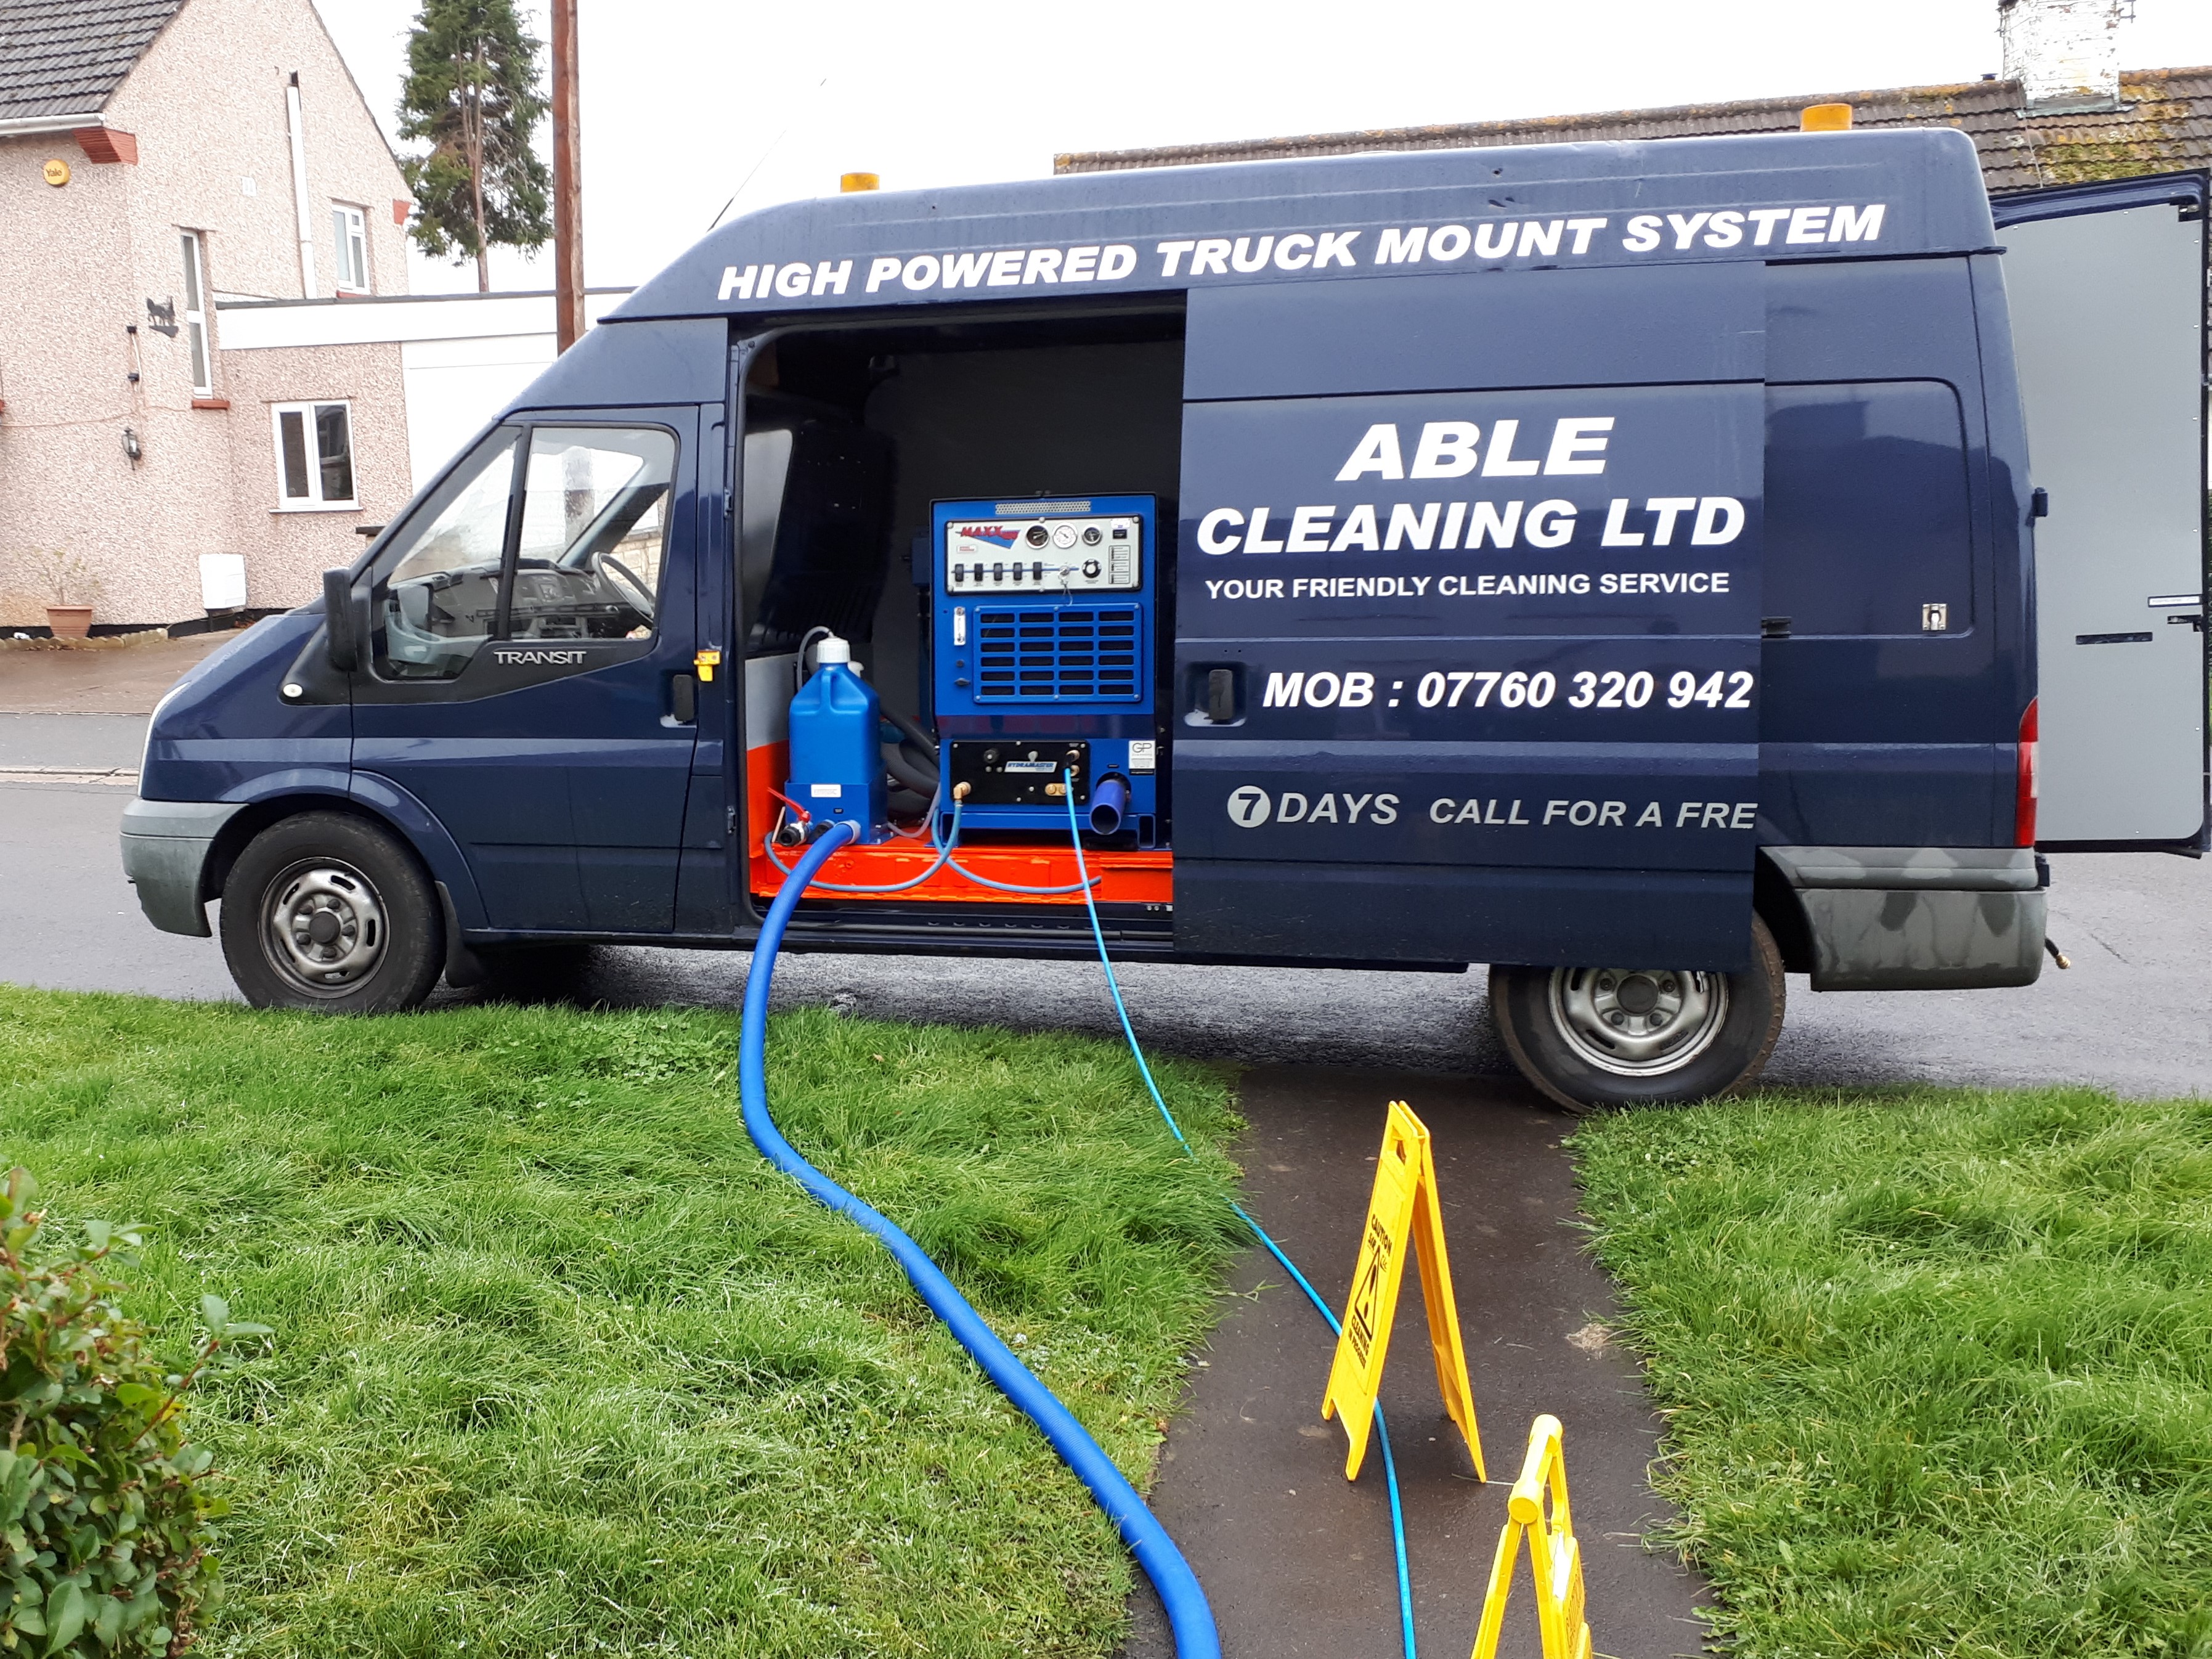 Van used for carpet cleaning in Bath